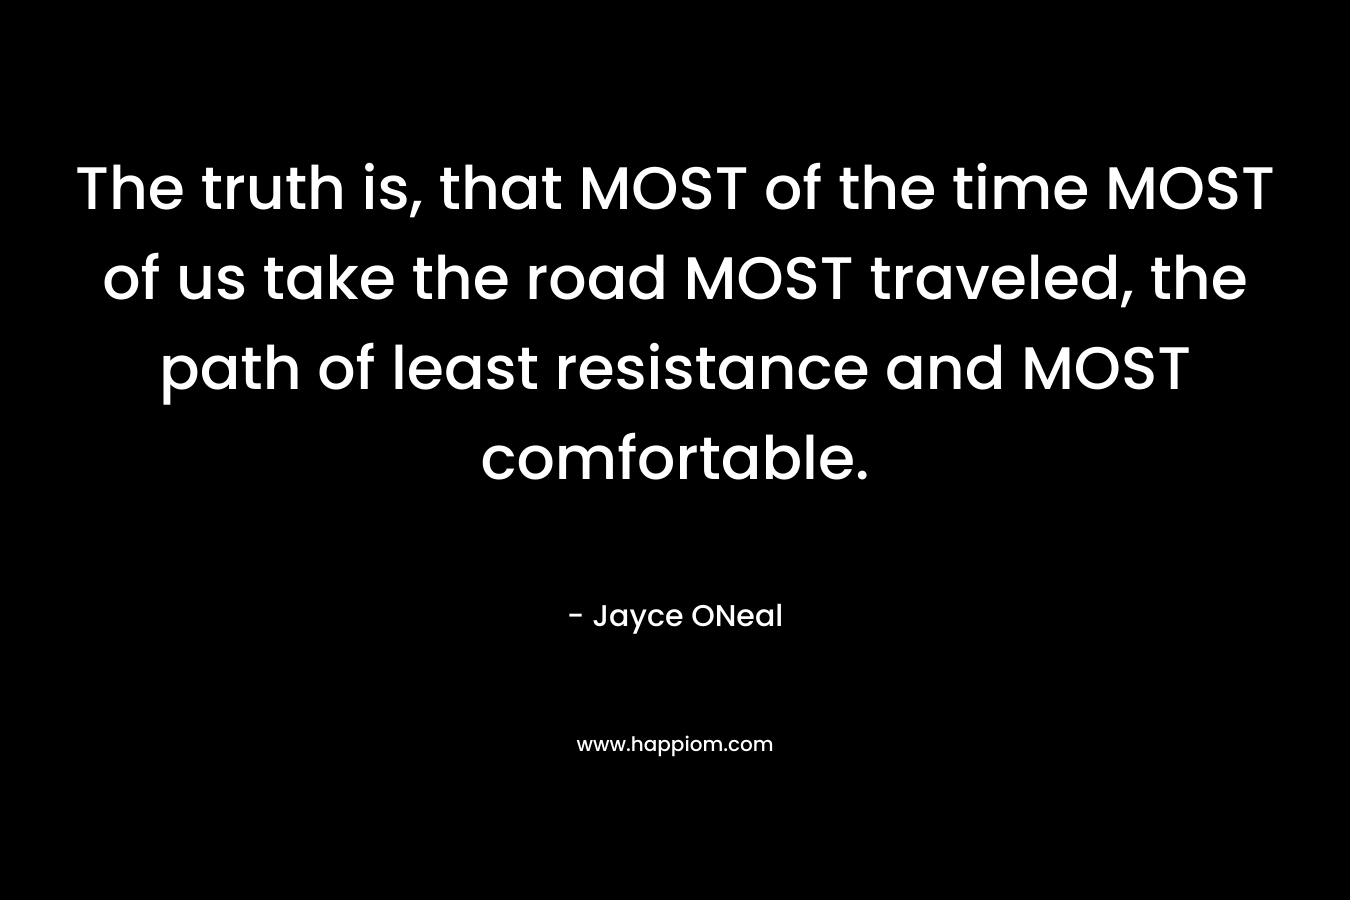 The truth is, that MOST of the time MOST of us take the road MOST traveled, the path of least resistance and MOST comfortable. – Jayce ONeal